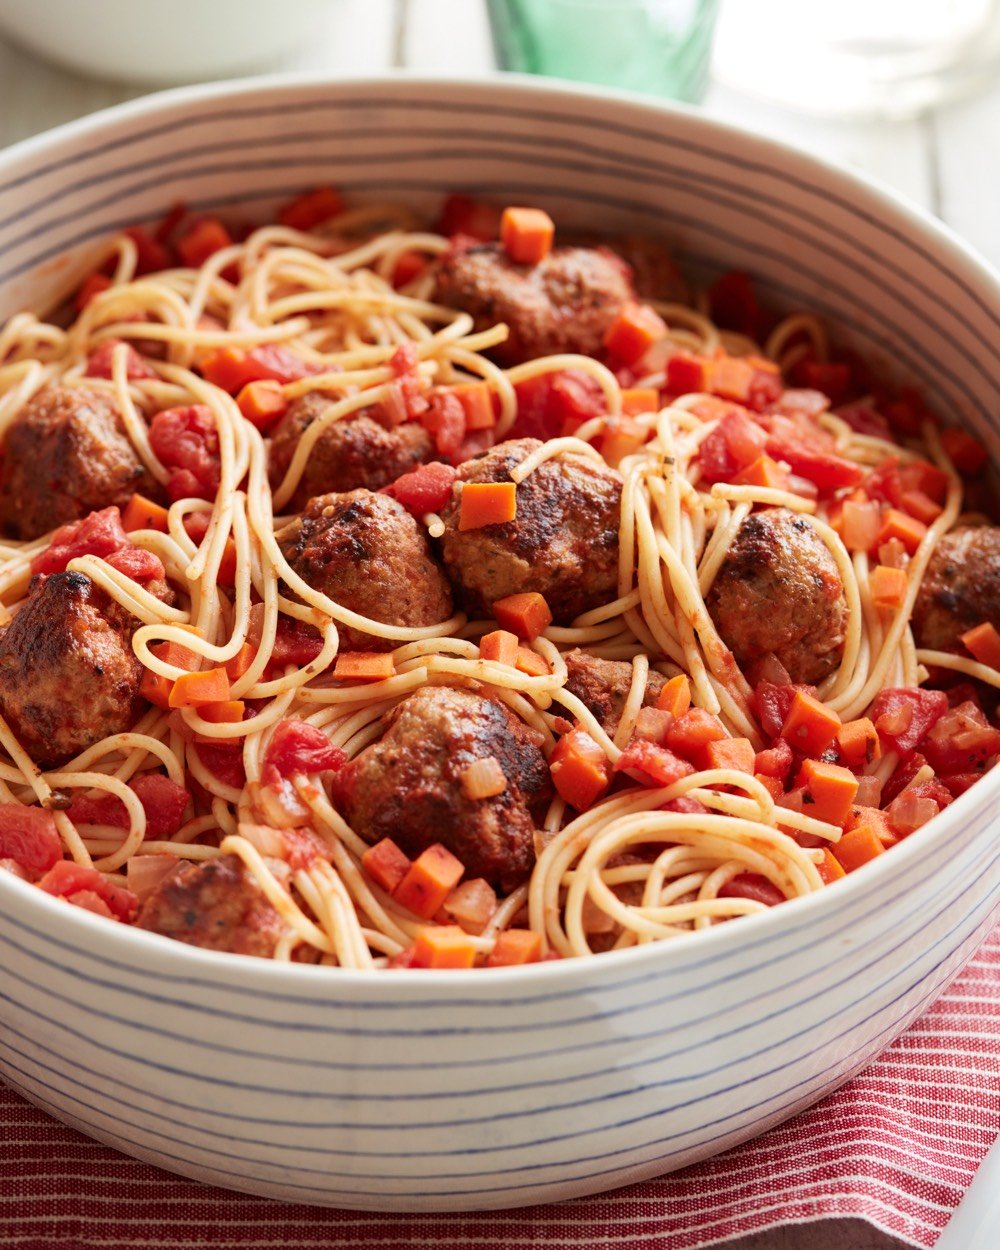 Spaghetti with Turkey Meatballs from weelicious.com